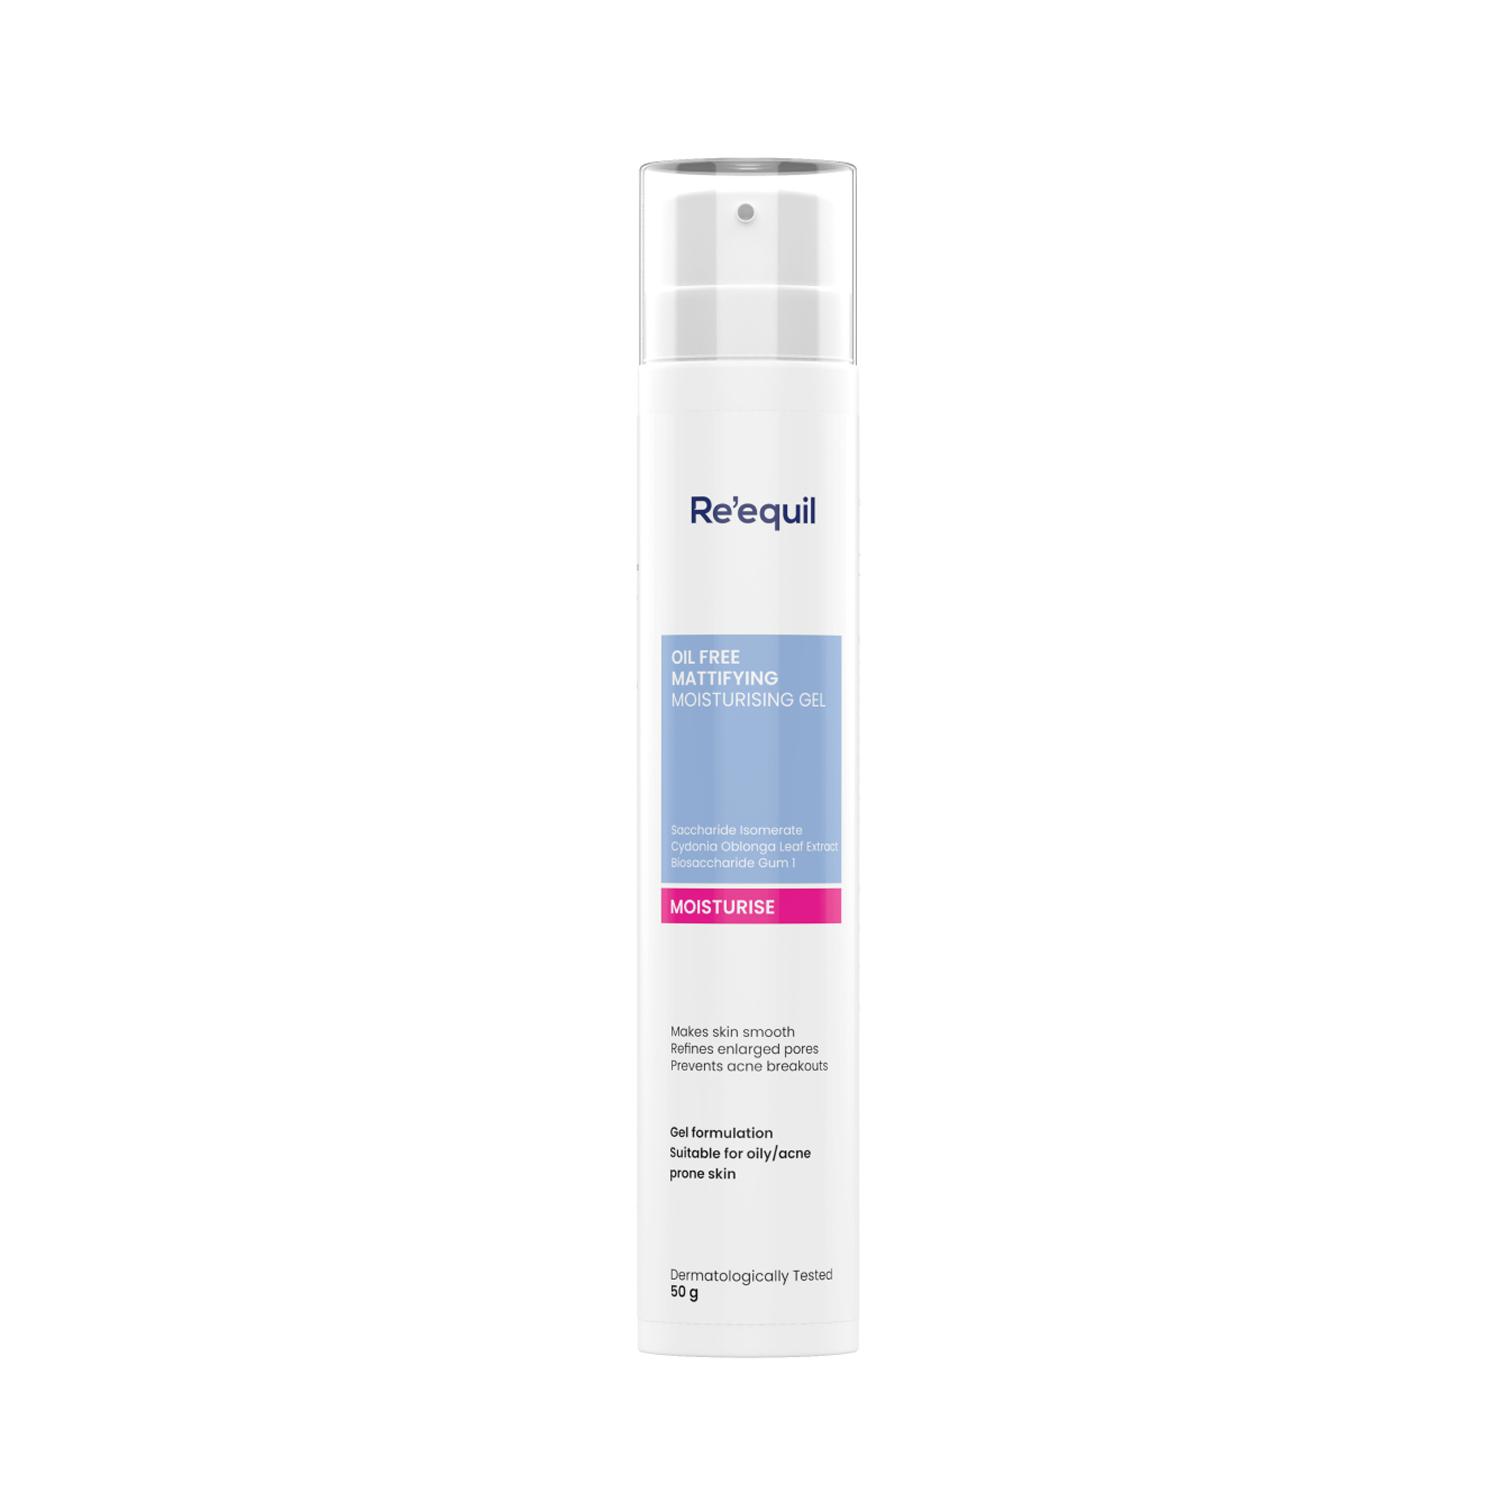 Re'equil Oil Free Mattifying Moisturizer (50g)